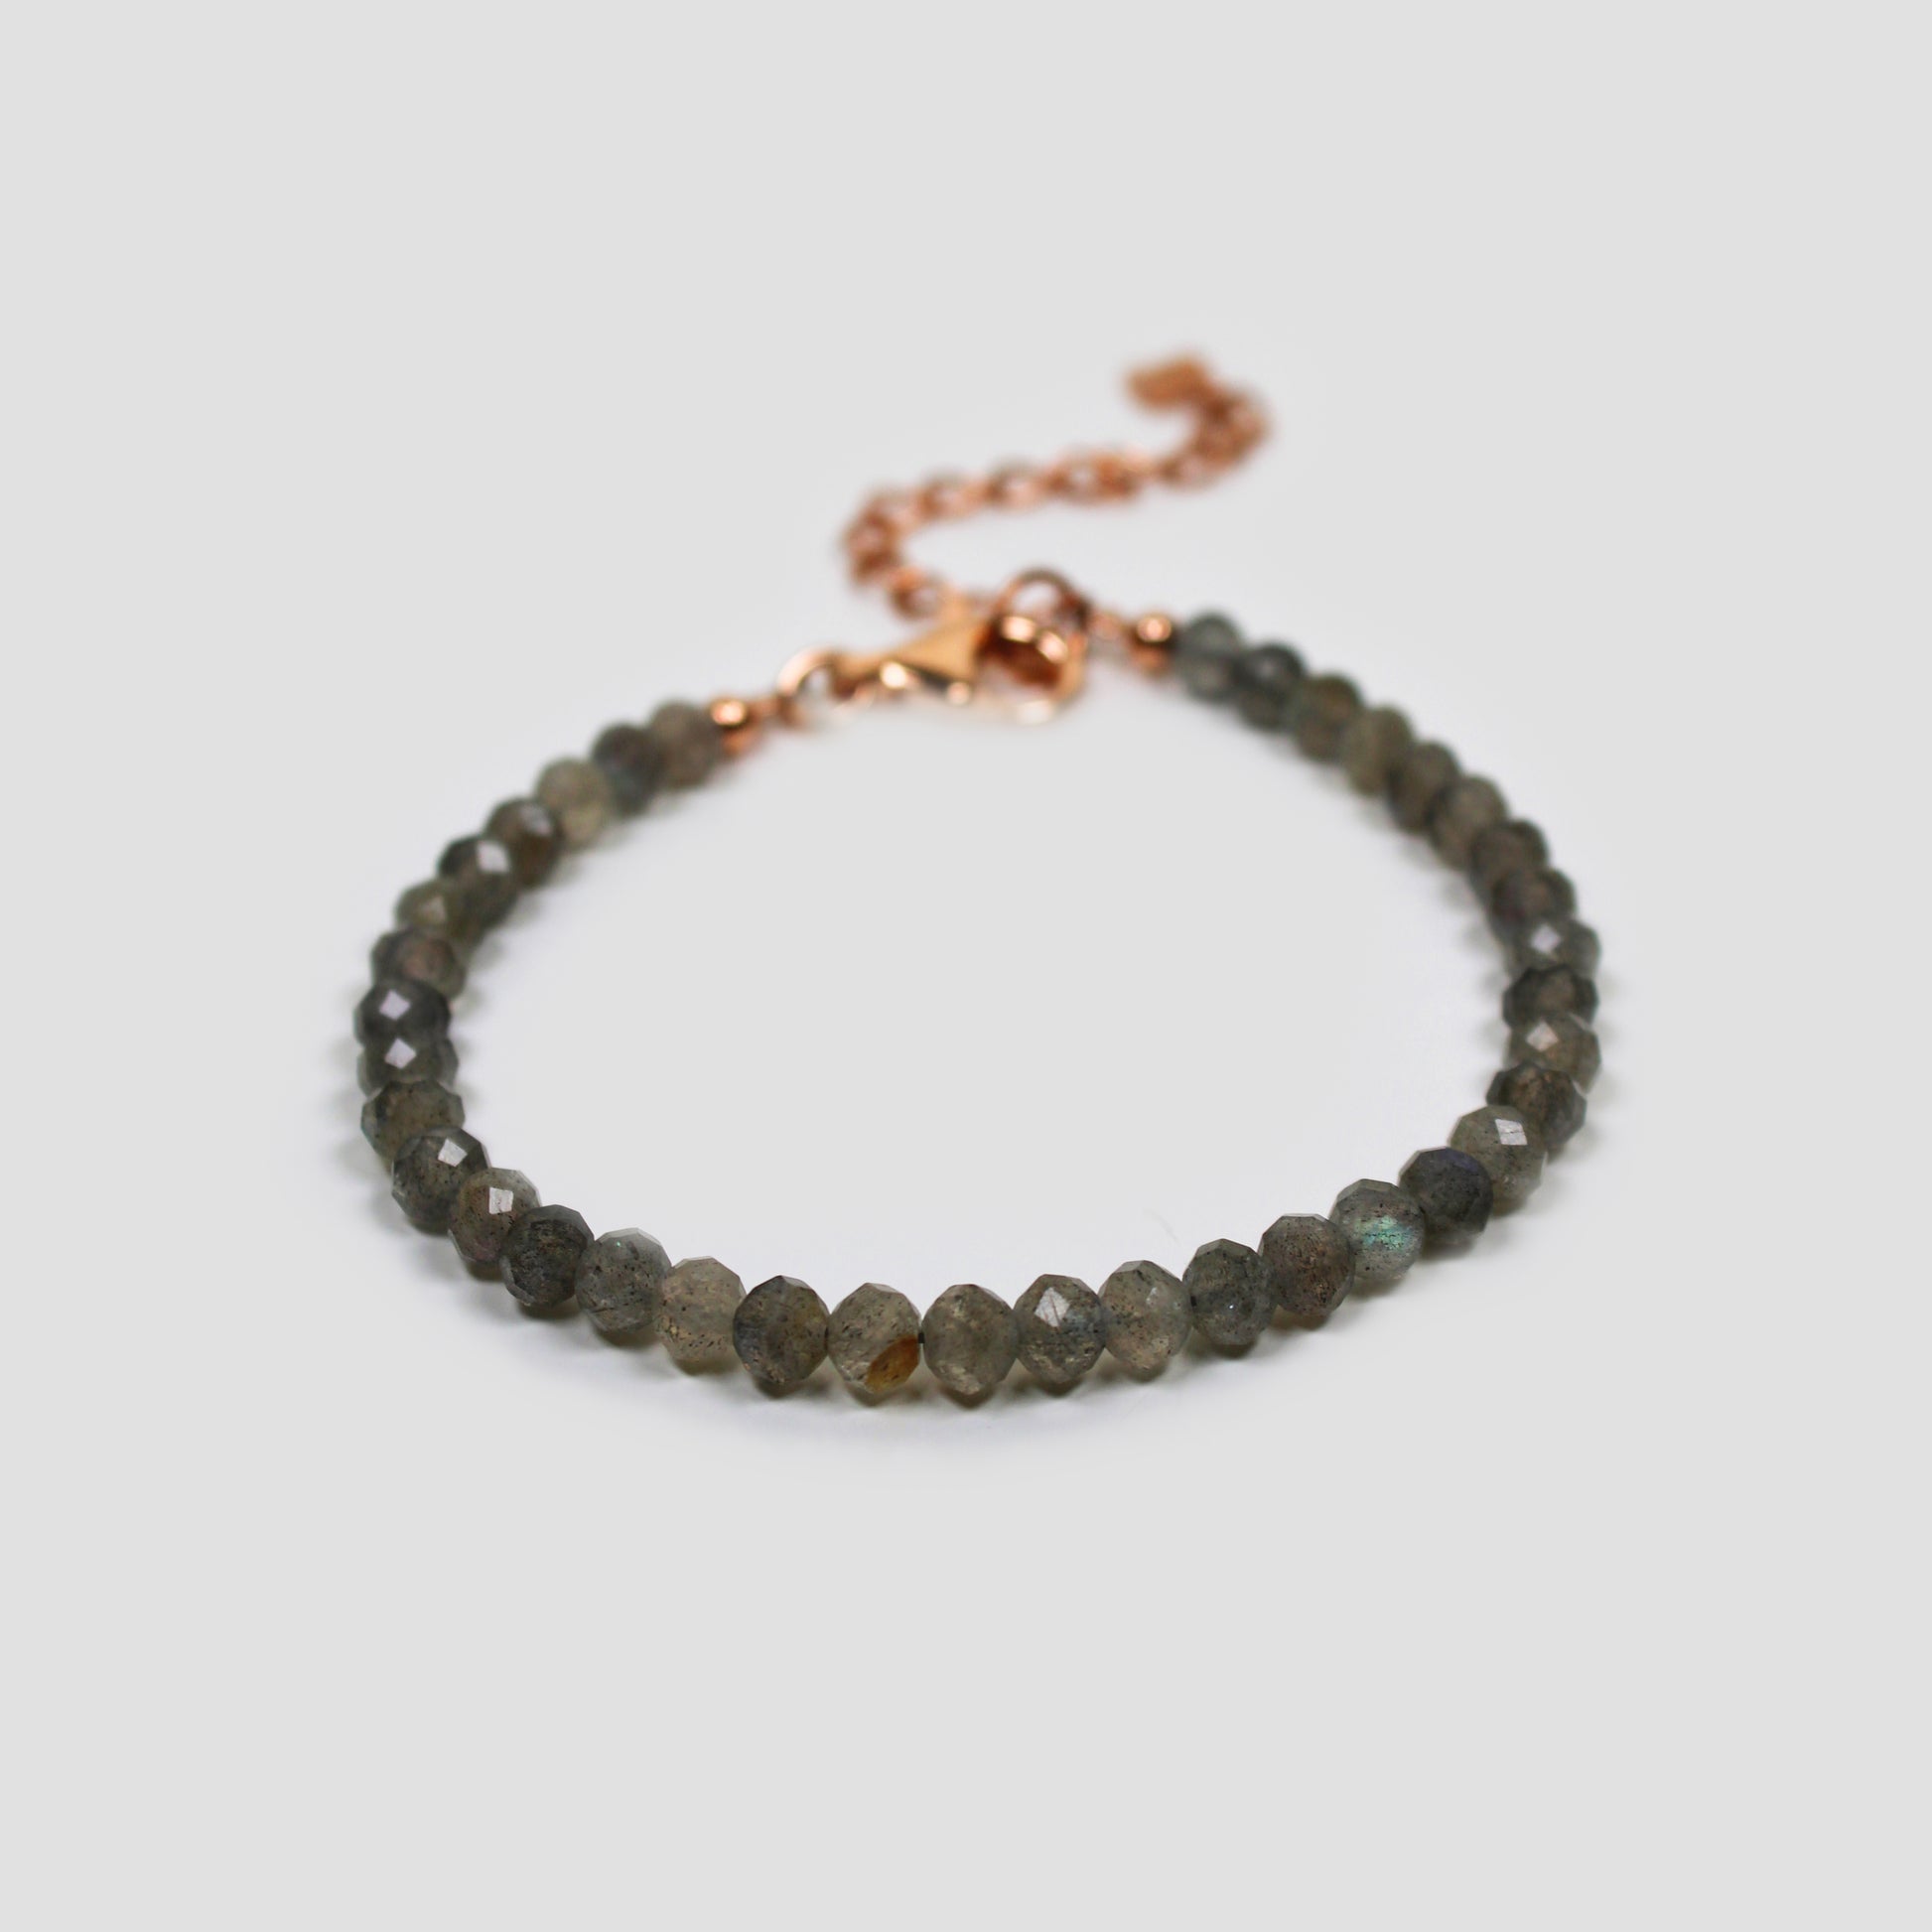 Green Labradorite Faceted Bracelet on a gray surface